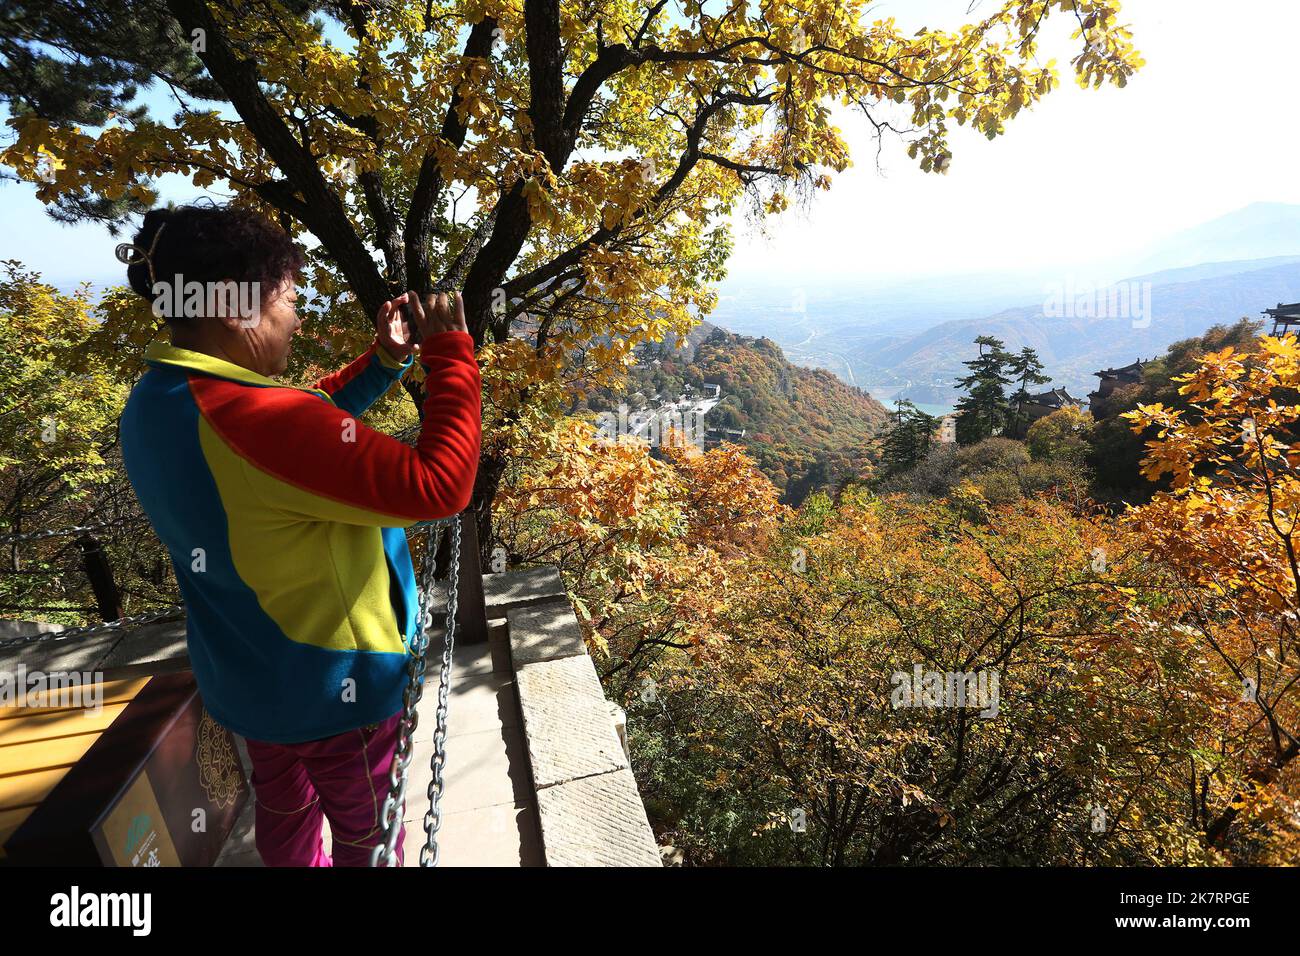 PINGLIANG, CHINA - OCTOBER 18, 2022 - Tourists visit the scenery of colorful leaves in Kongtong Mountain in Pingliang city, Northwest China's Gansu pr Stock Photo